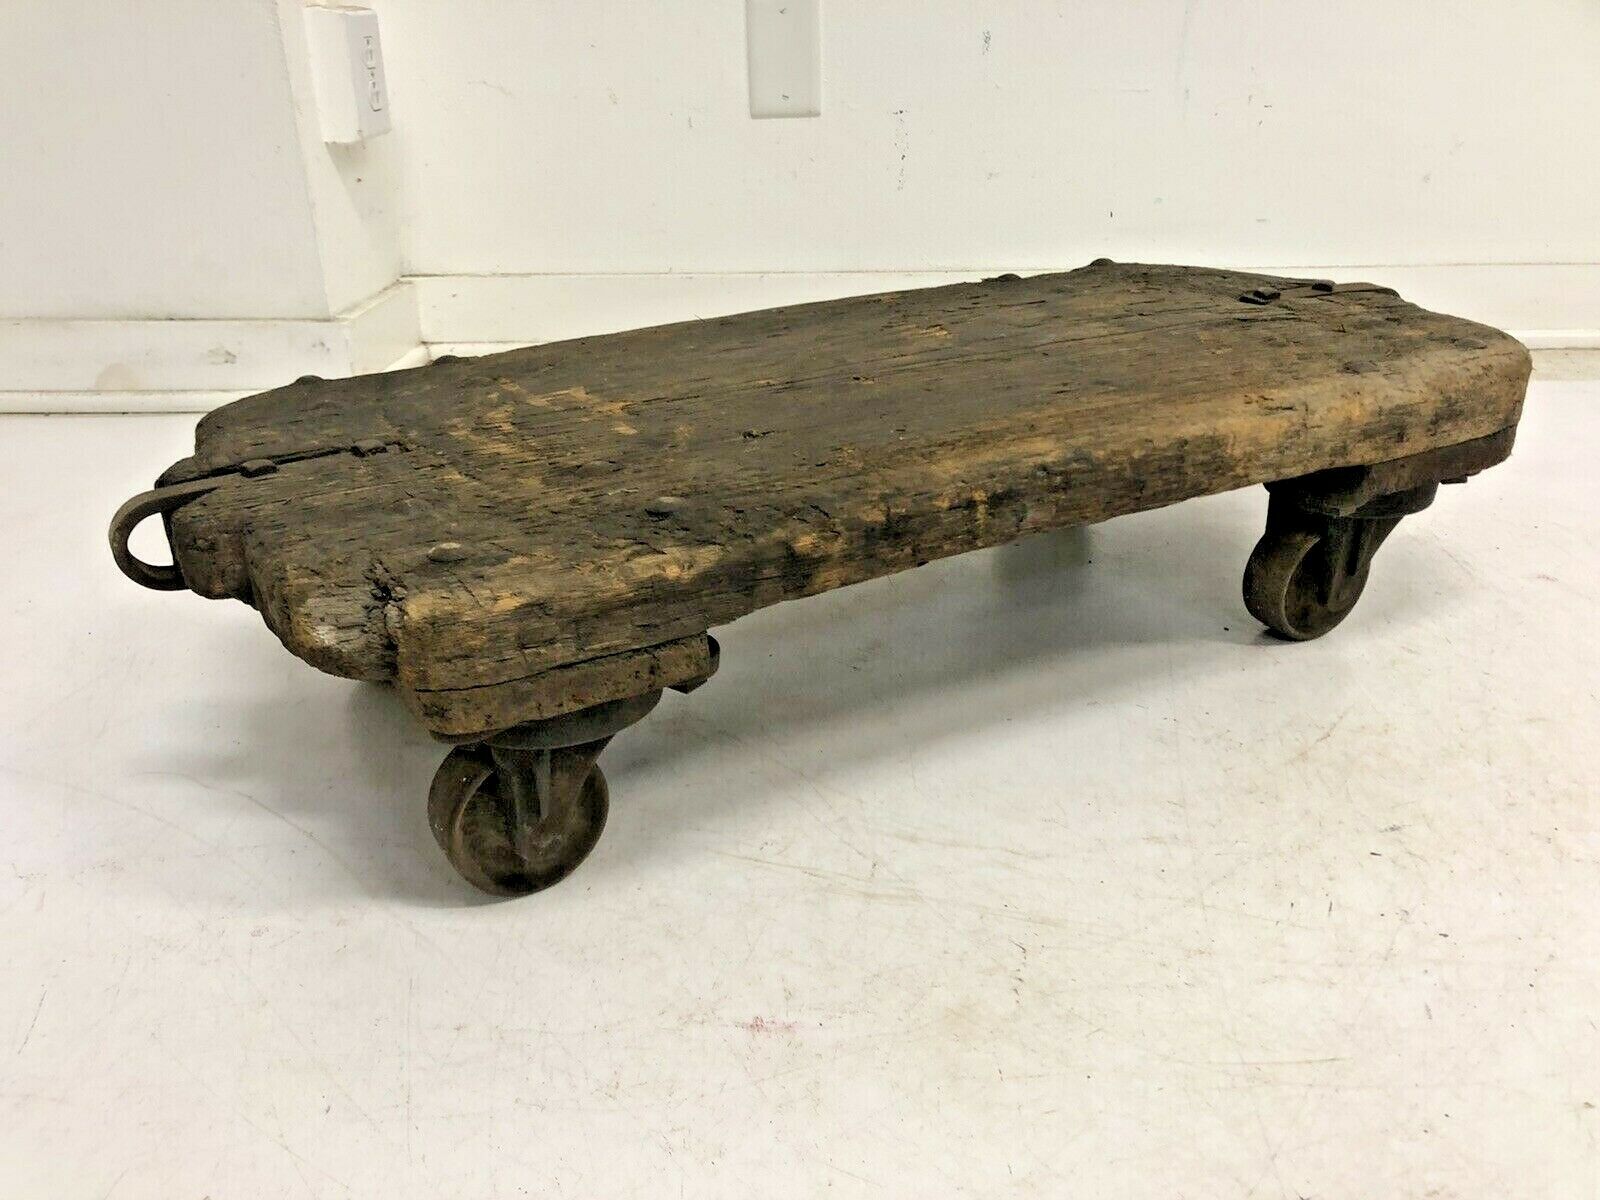 Vintage Industrial Cart Wood Table Base Stand Metal Steampunk Old Factory Decor